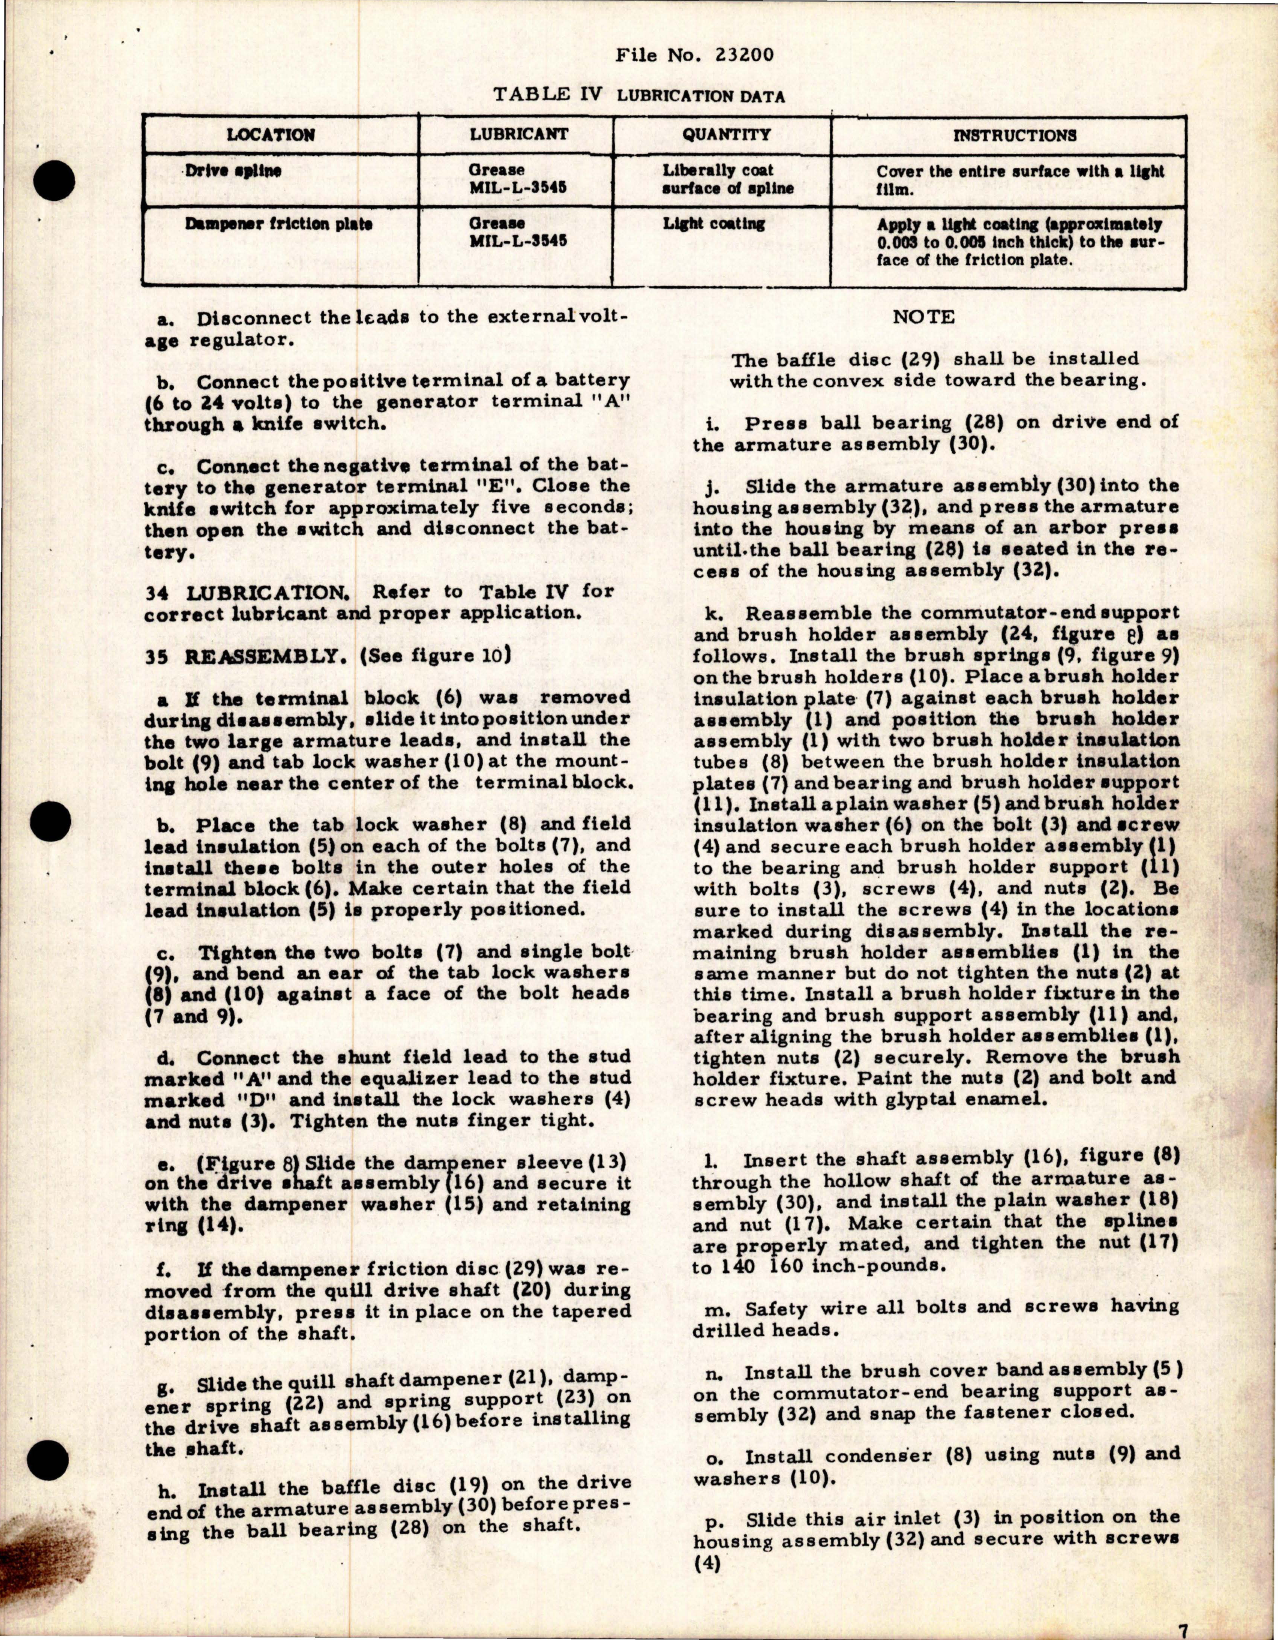 Sample page 9 from AirCorps Library document: Overhaul Instructions with Parts Breakdown for Starter Generators 